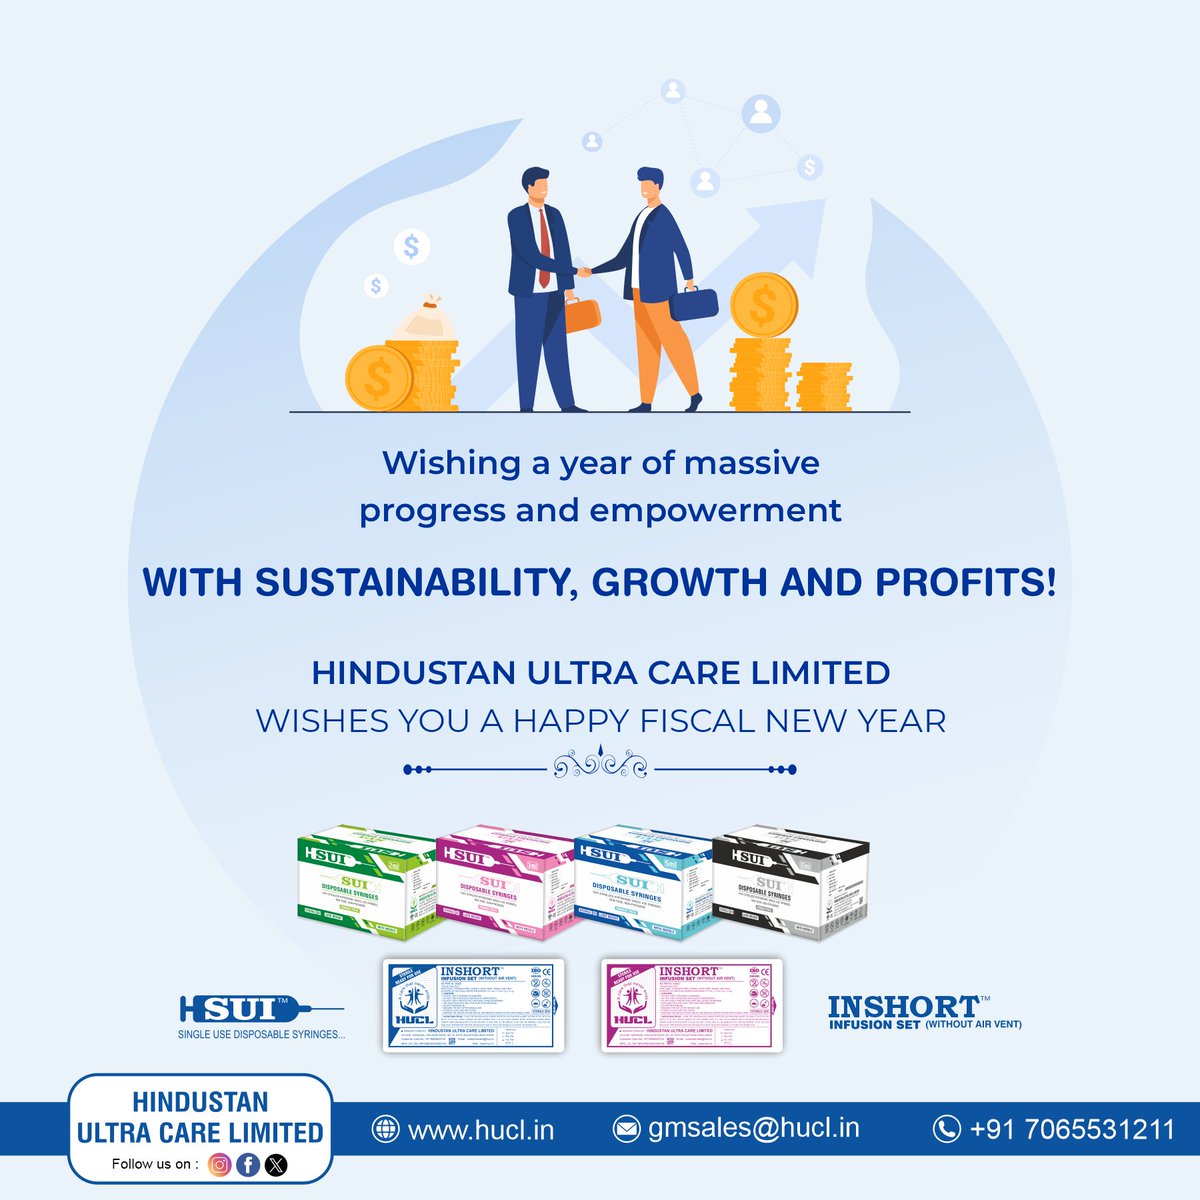 Wishing a year of massive
progress and empowerment
WITH SUSTAINABILITY, GROWTH AND PROFITS!

HINDUSTAN ULTRA CARE LIMITED
WISHES YOU A HAPPY FISCAL NEW YEAR

#wishing #happy #hindustan #profit #newyear
#medicalequipment #hindustan #vaccine
#healthcareadvancements #newproduct